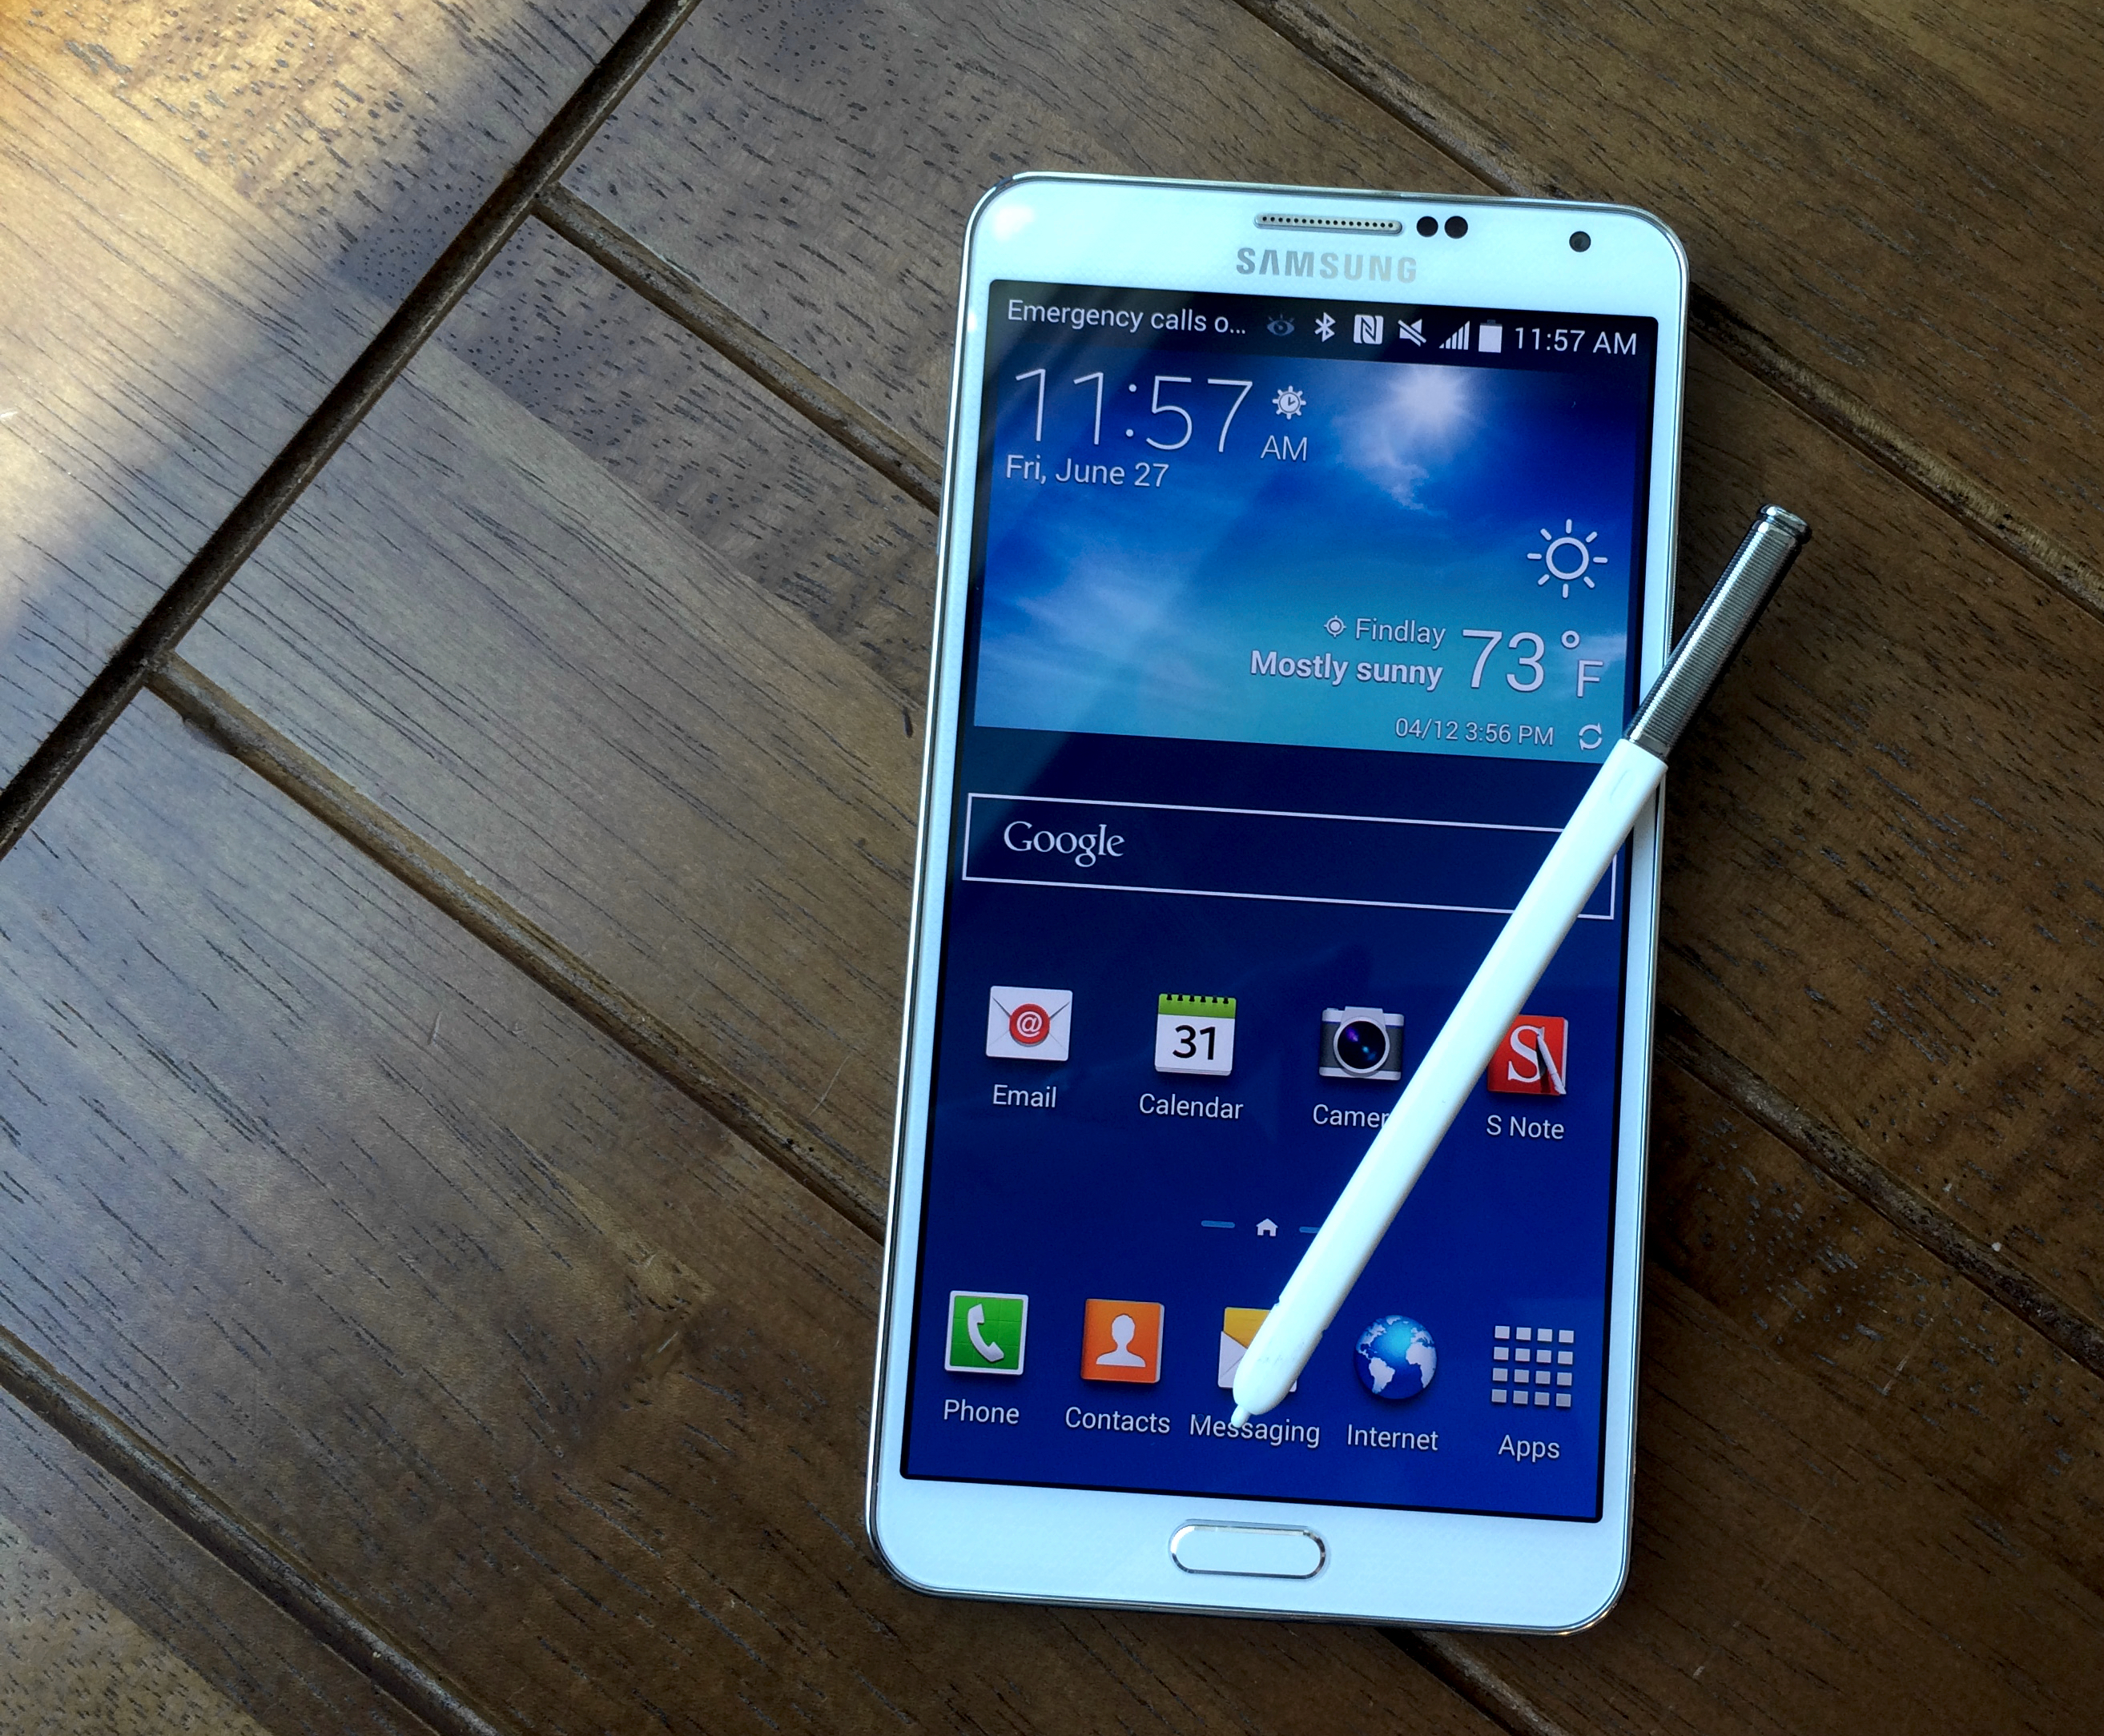 The Galaxy Note 4 feature list includes a UV sensor that can help keep your skin healthy.